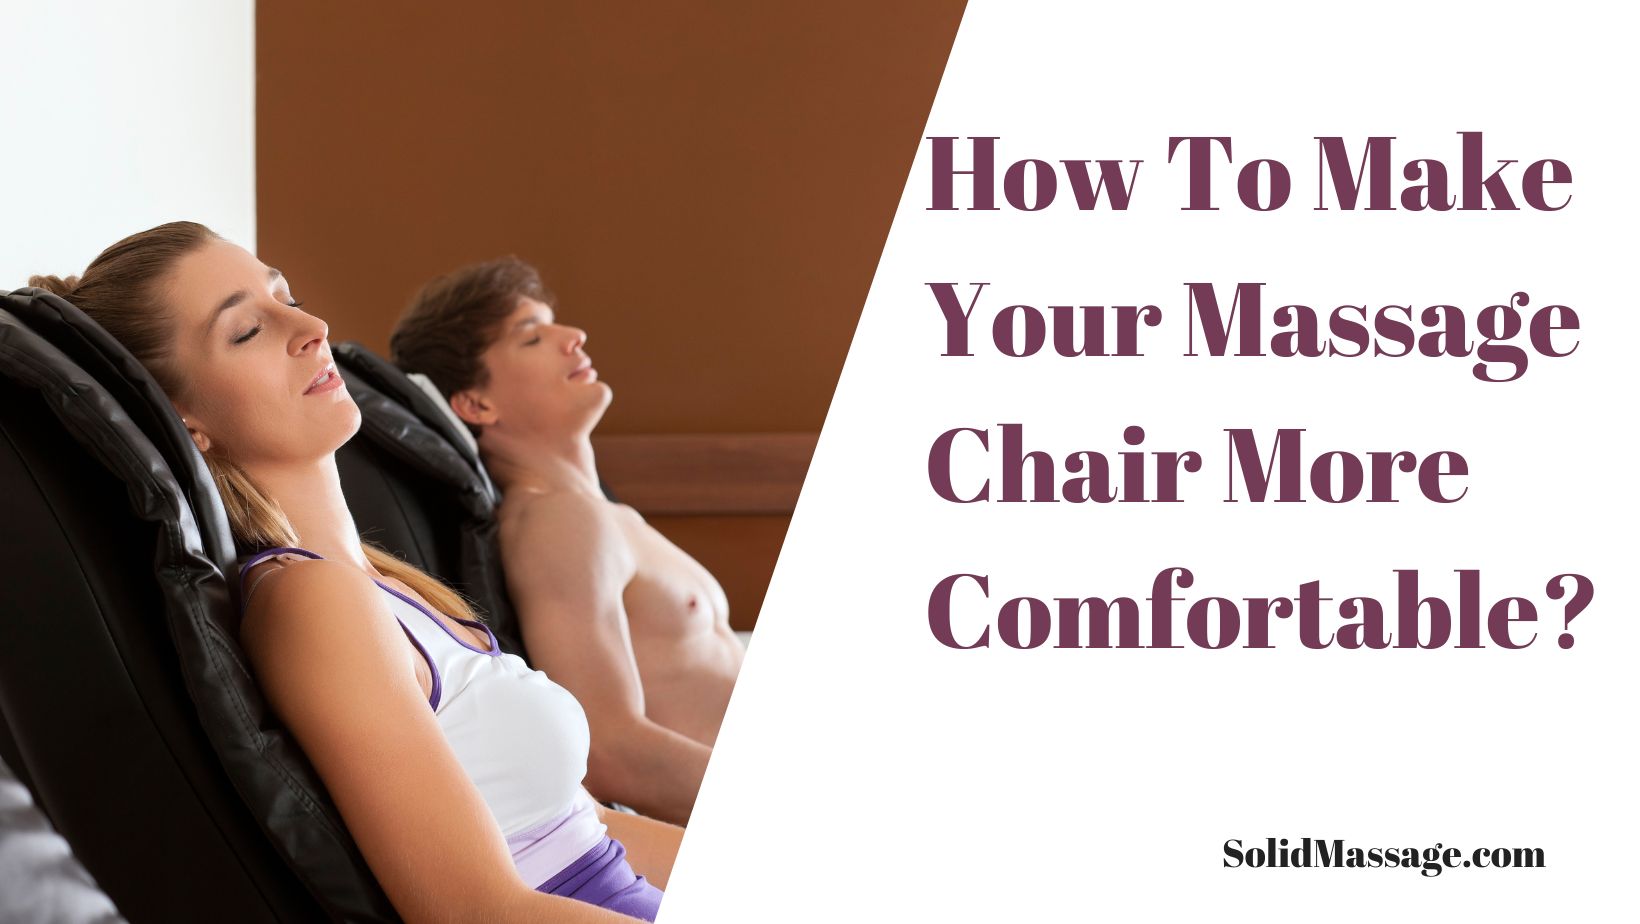 How To Make Your Massage Chair More Comfortable